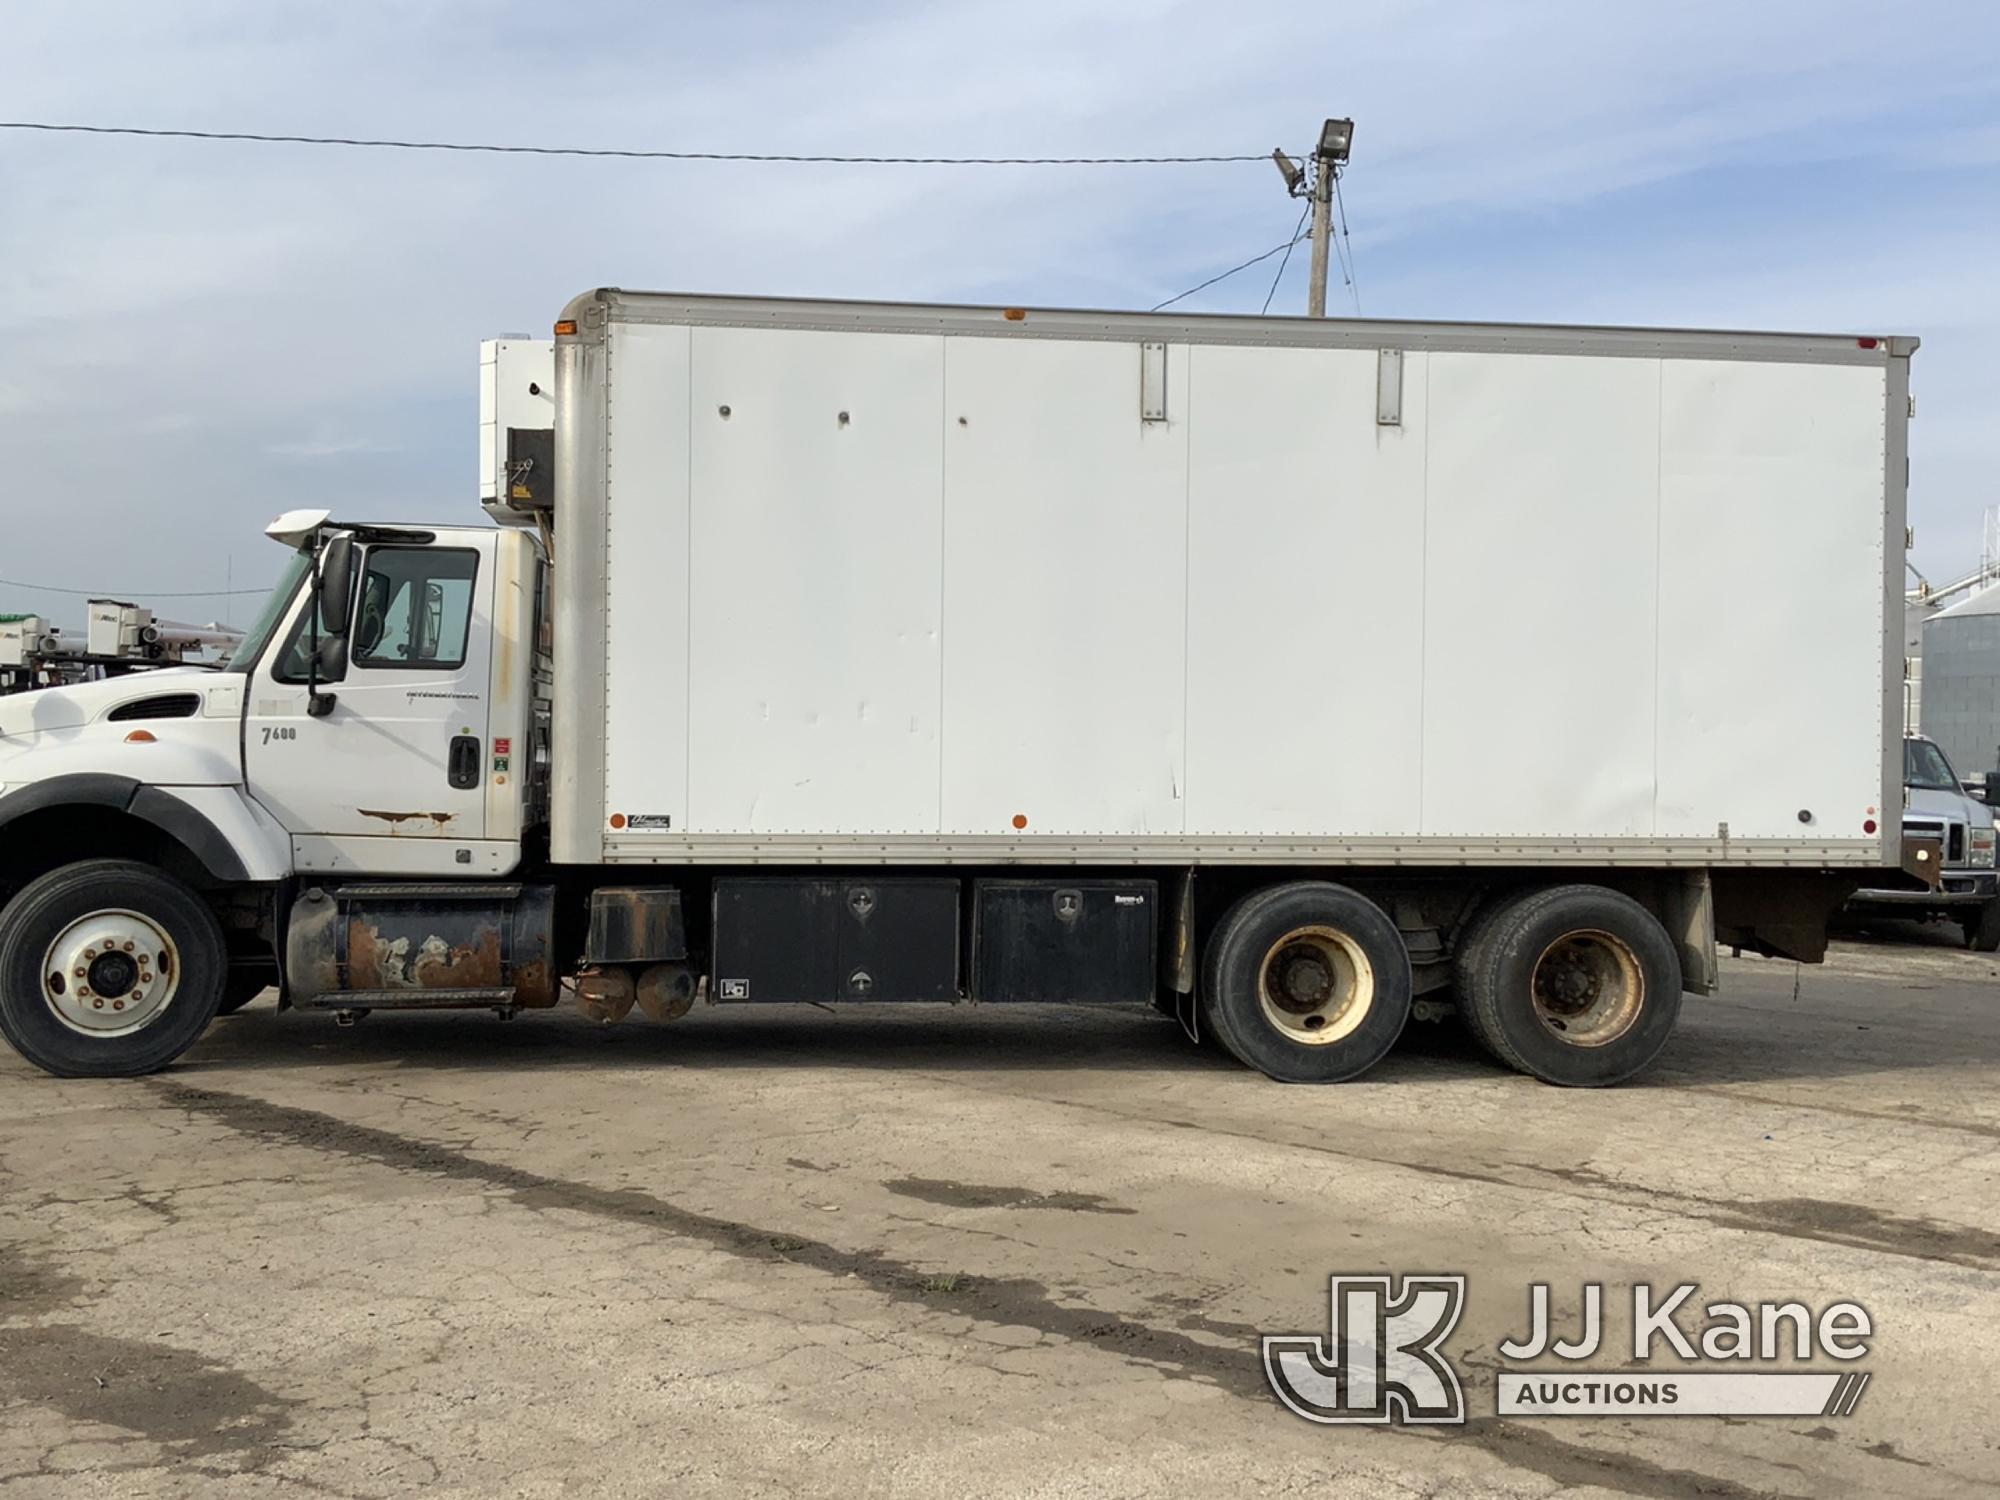 (South Beloit, IL) 2005 International 7600 T/A Van Body Truck, Stairs & Benches NOT Included Runs, M